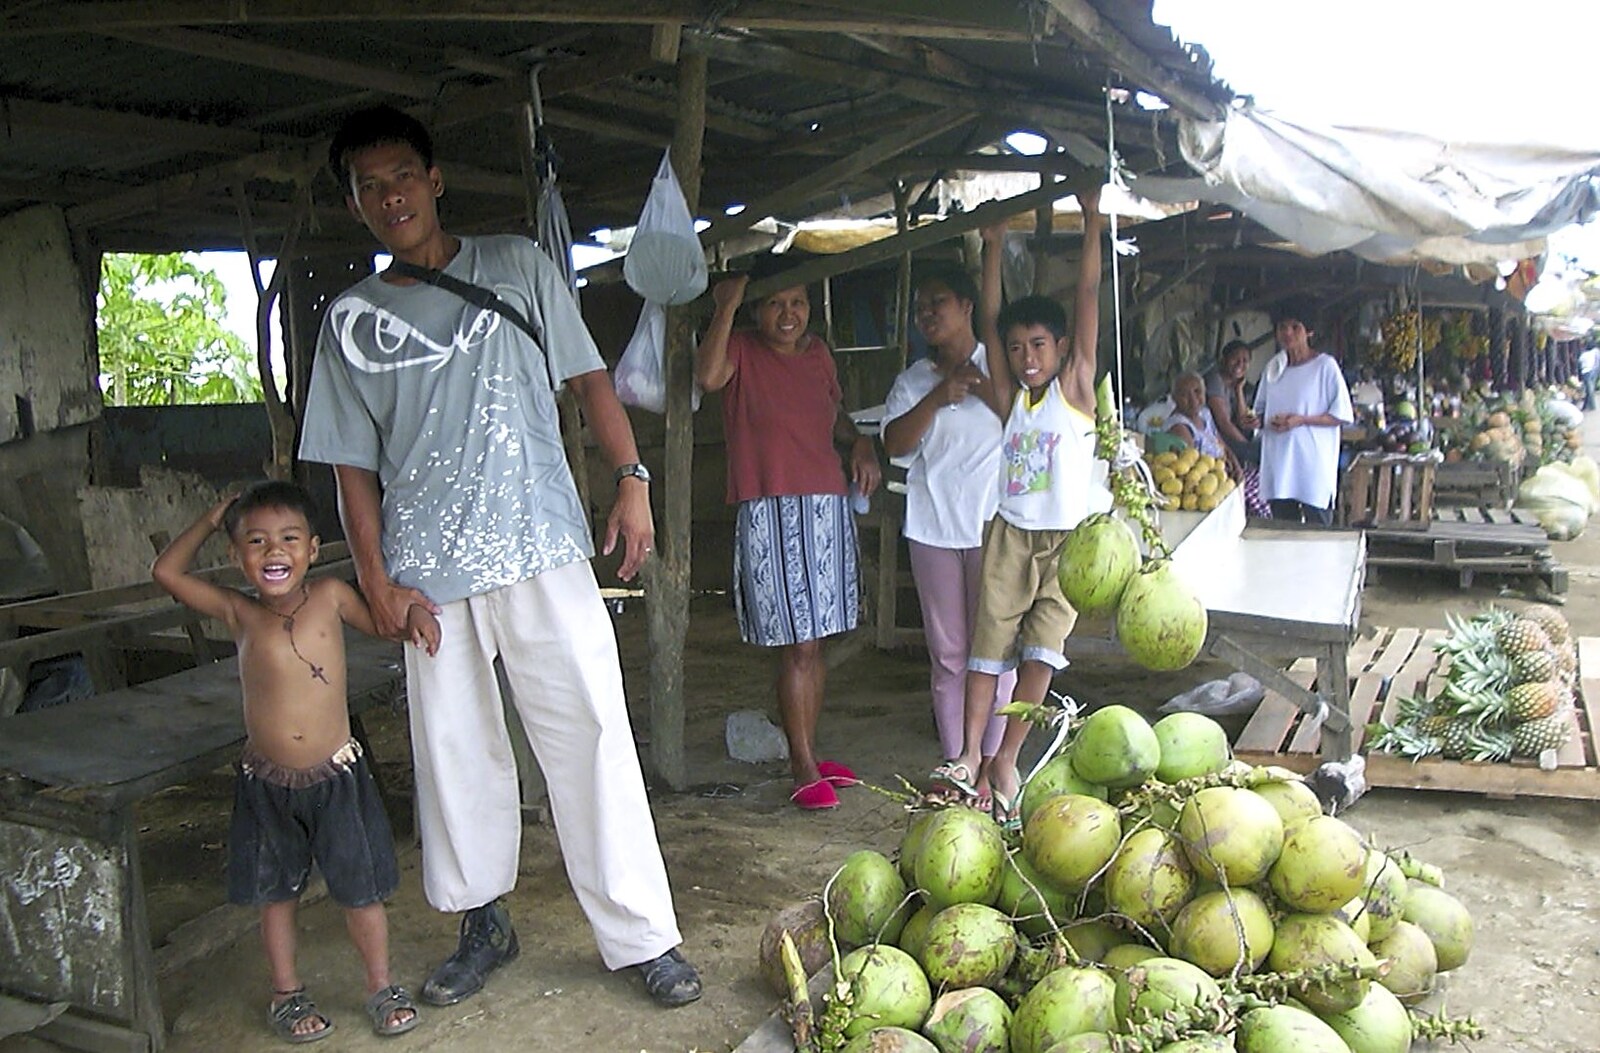 A family of fruit sellers from A Postcard From Manila: a Working Trip, Philippines - 9th July 2004